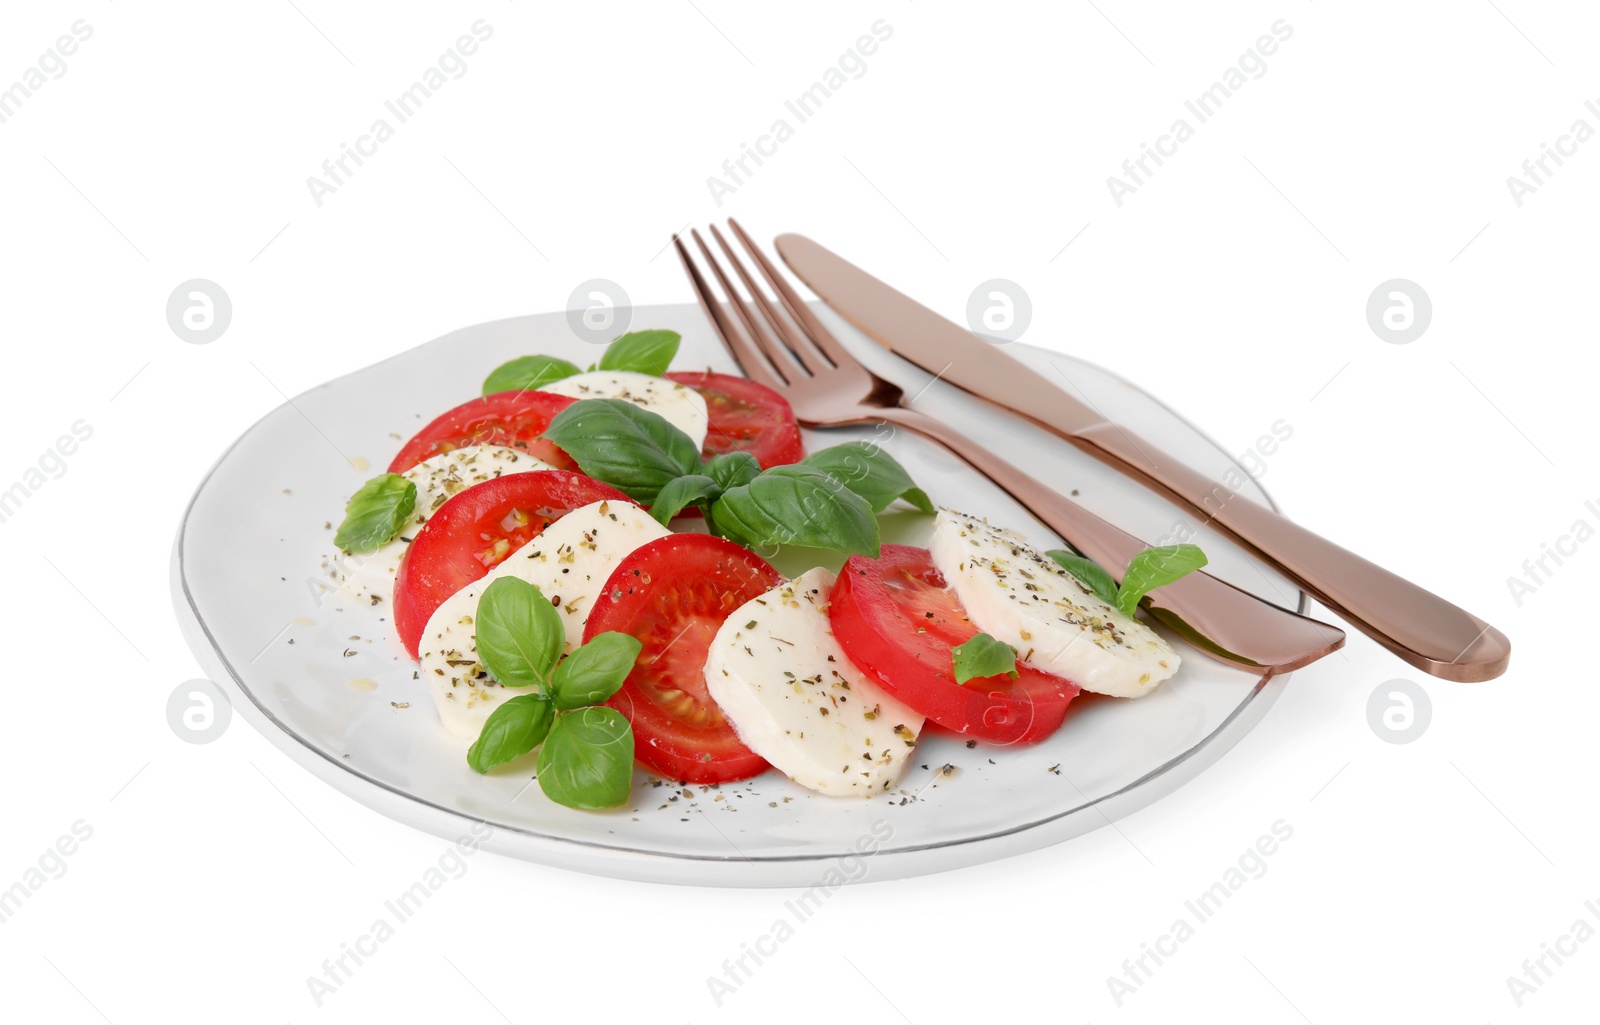 Photo of Plate of delicious Caprese salad with tomatoes, mozzarella, basil, spices and cutlery isolated on white